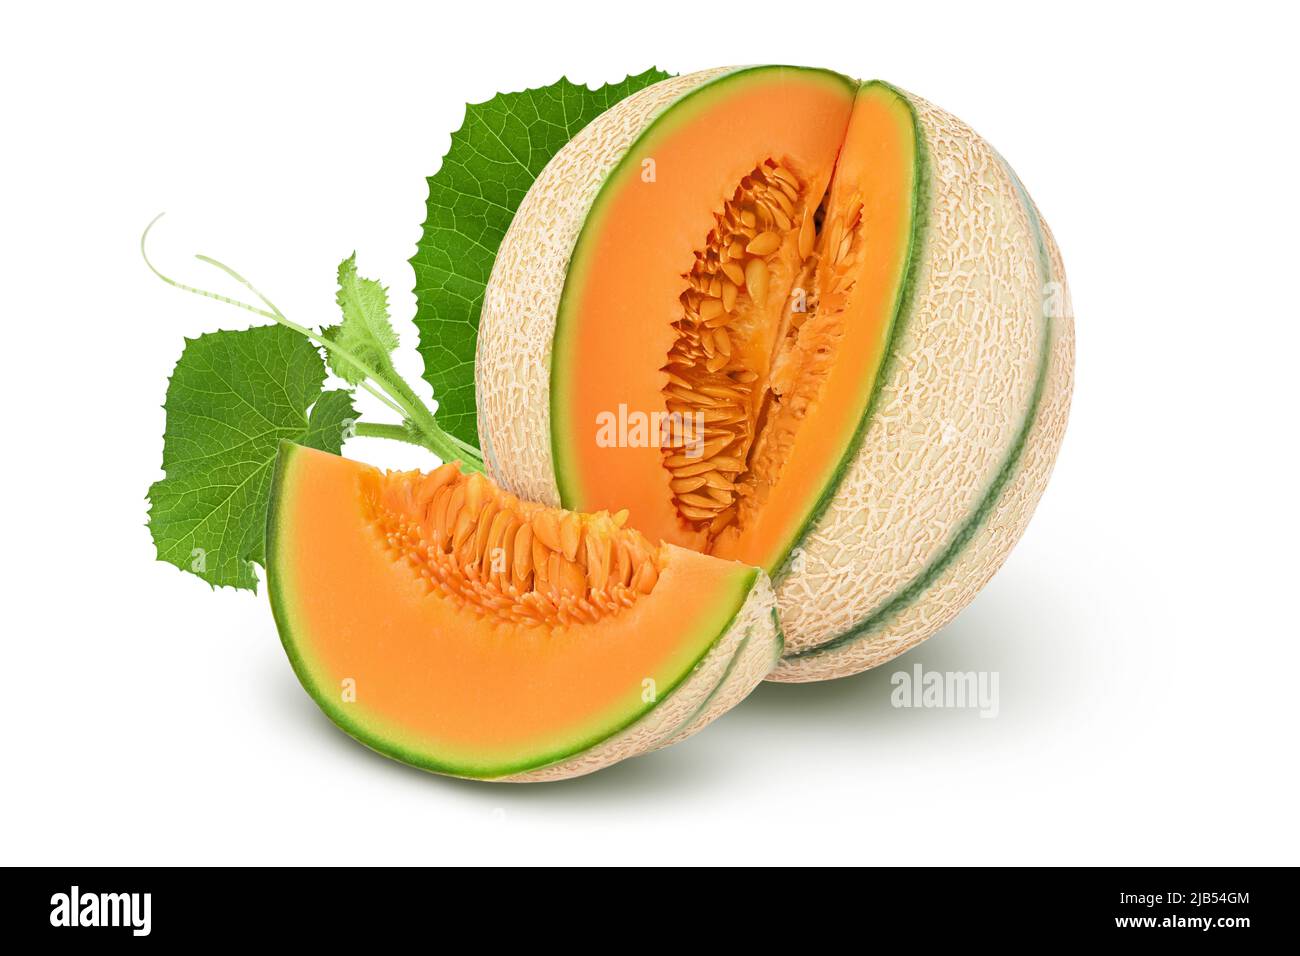 Cantaloupe melon isolated on white background with full depth of field, Stock Photo